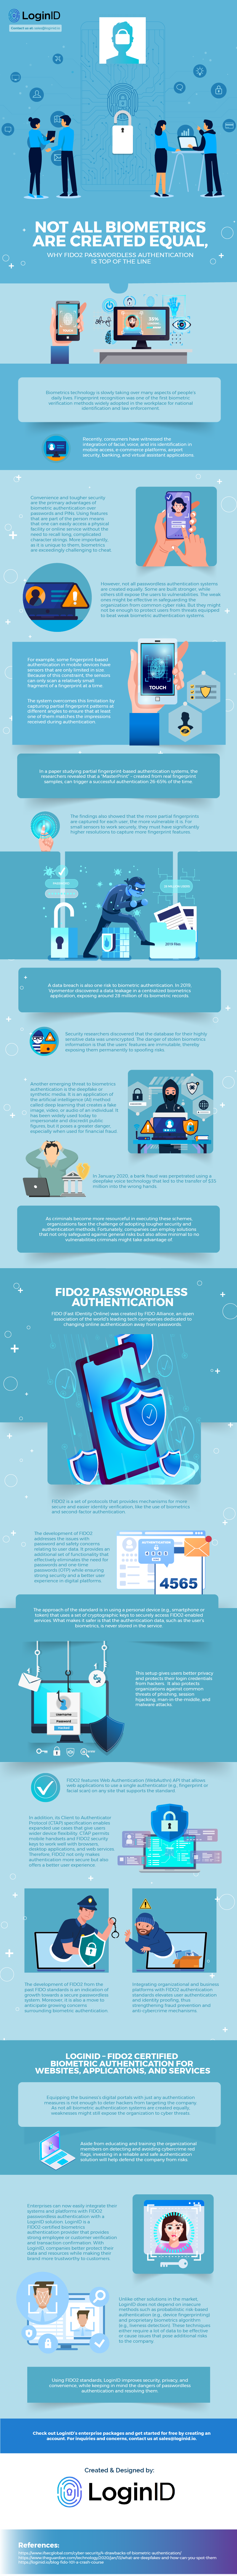 Not All Biometrics are Created Equal, Why FIDO2 Passwordless Authentication is Top of the Line - awdw132